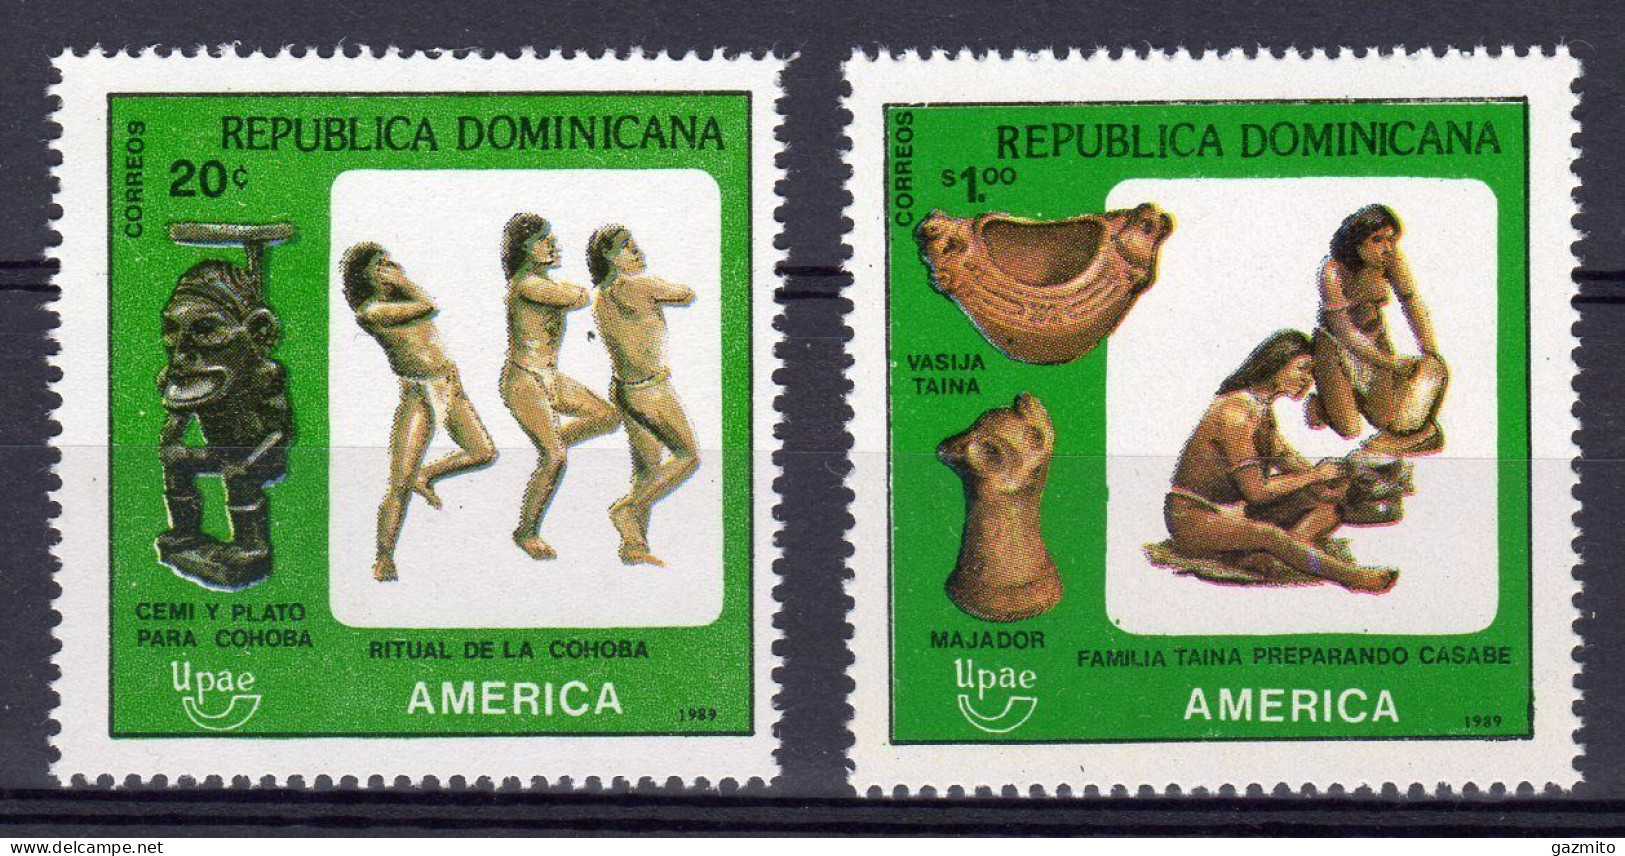 Dominicana 1989, UPAEP, Pre Colombian Artfacts, 2val - UPU (Union Postale Universelle)